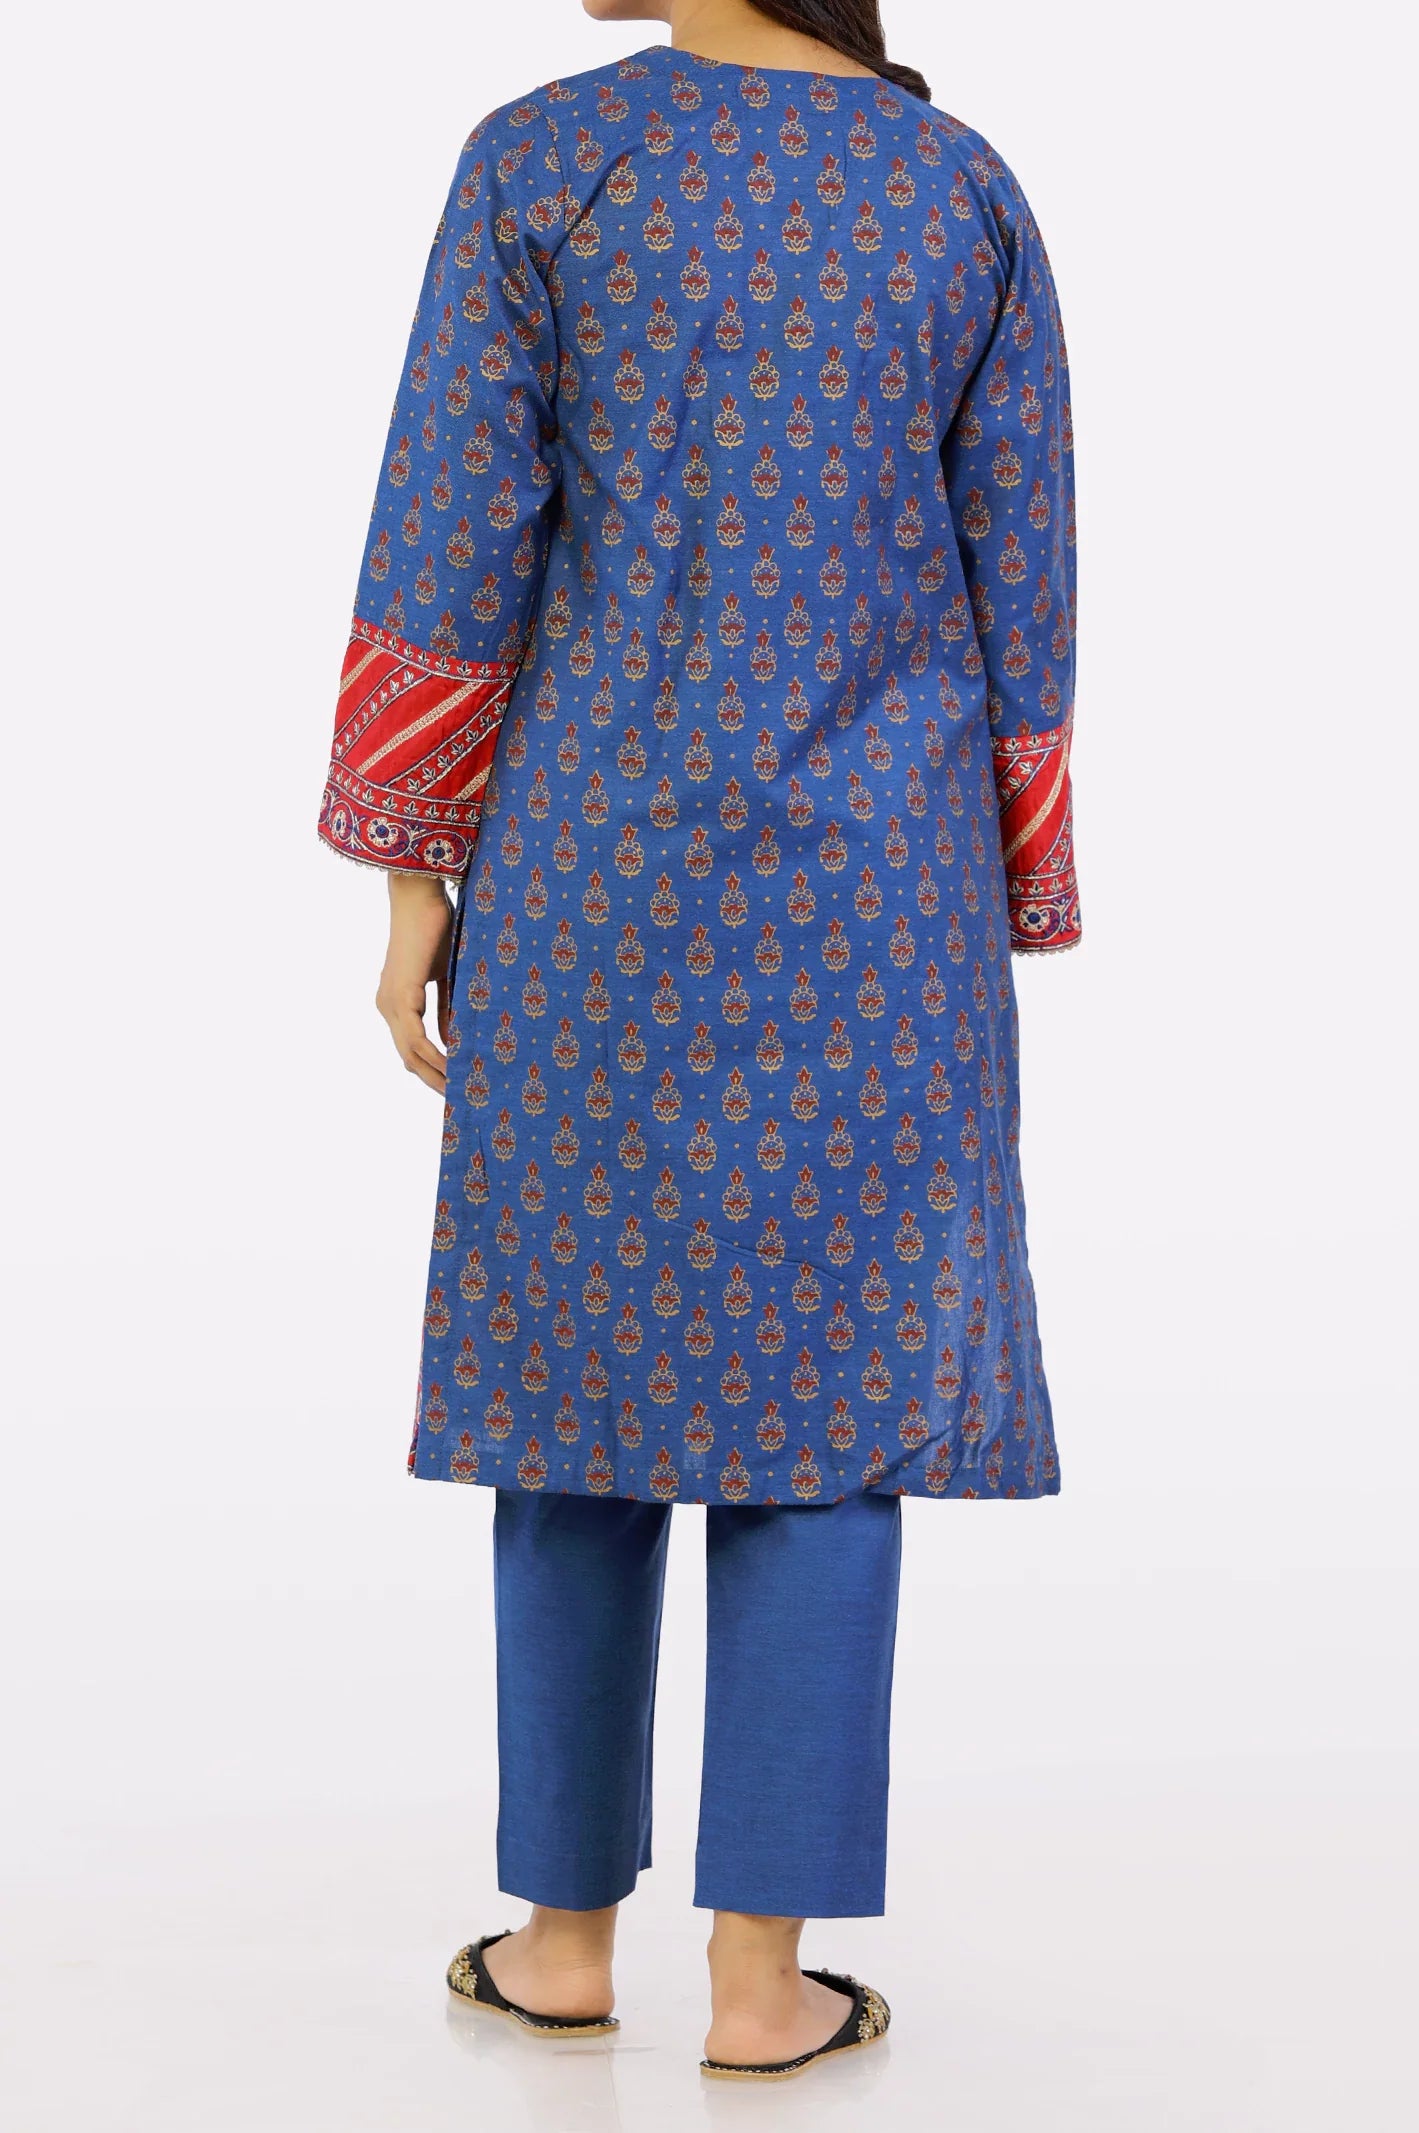 2PC Navy Blue Embroidered Suit for Womens